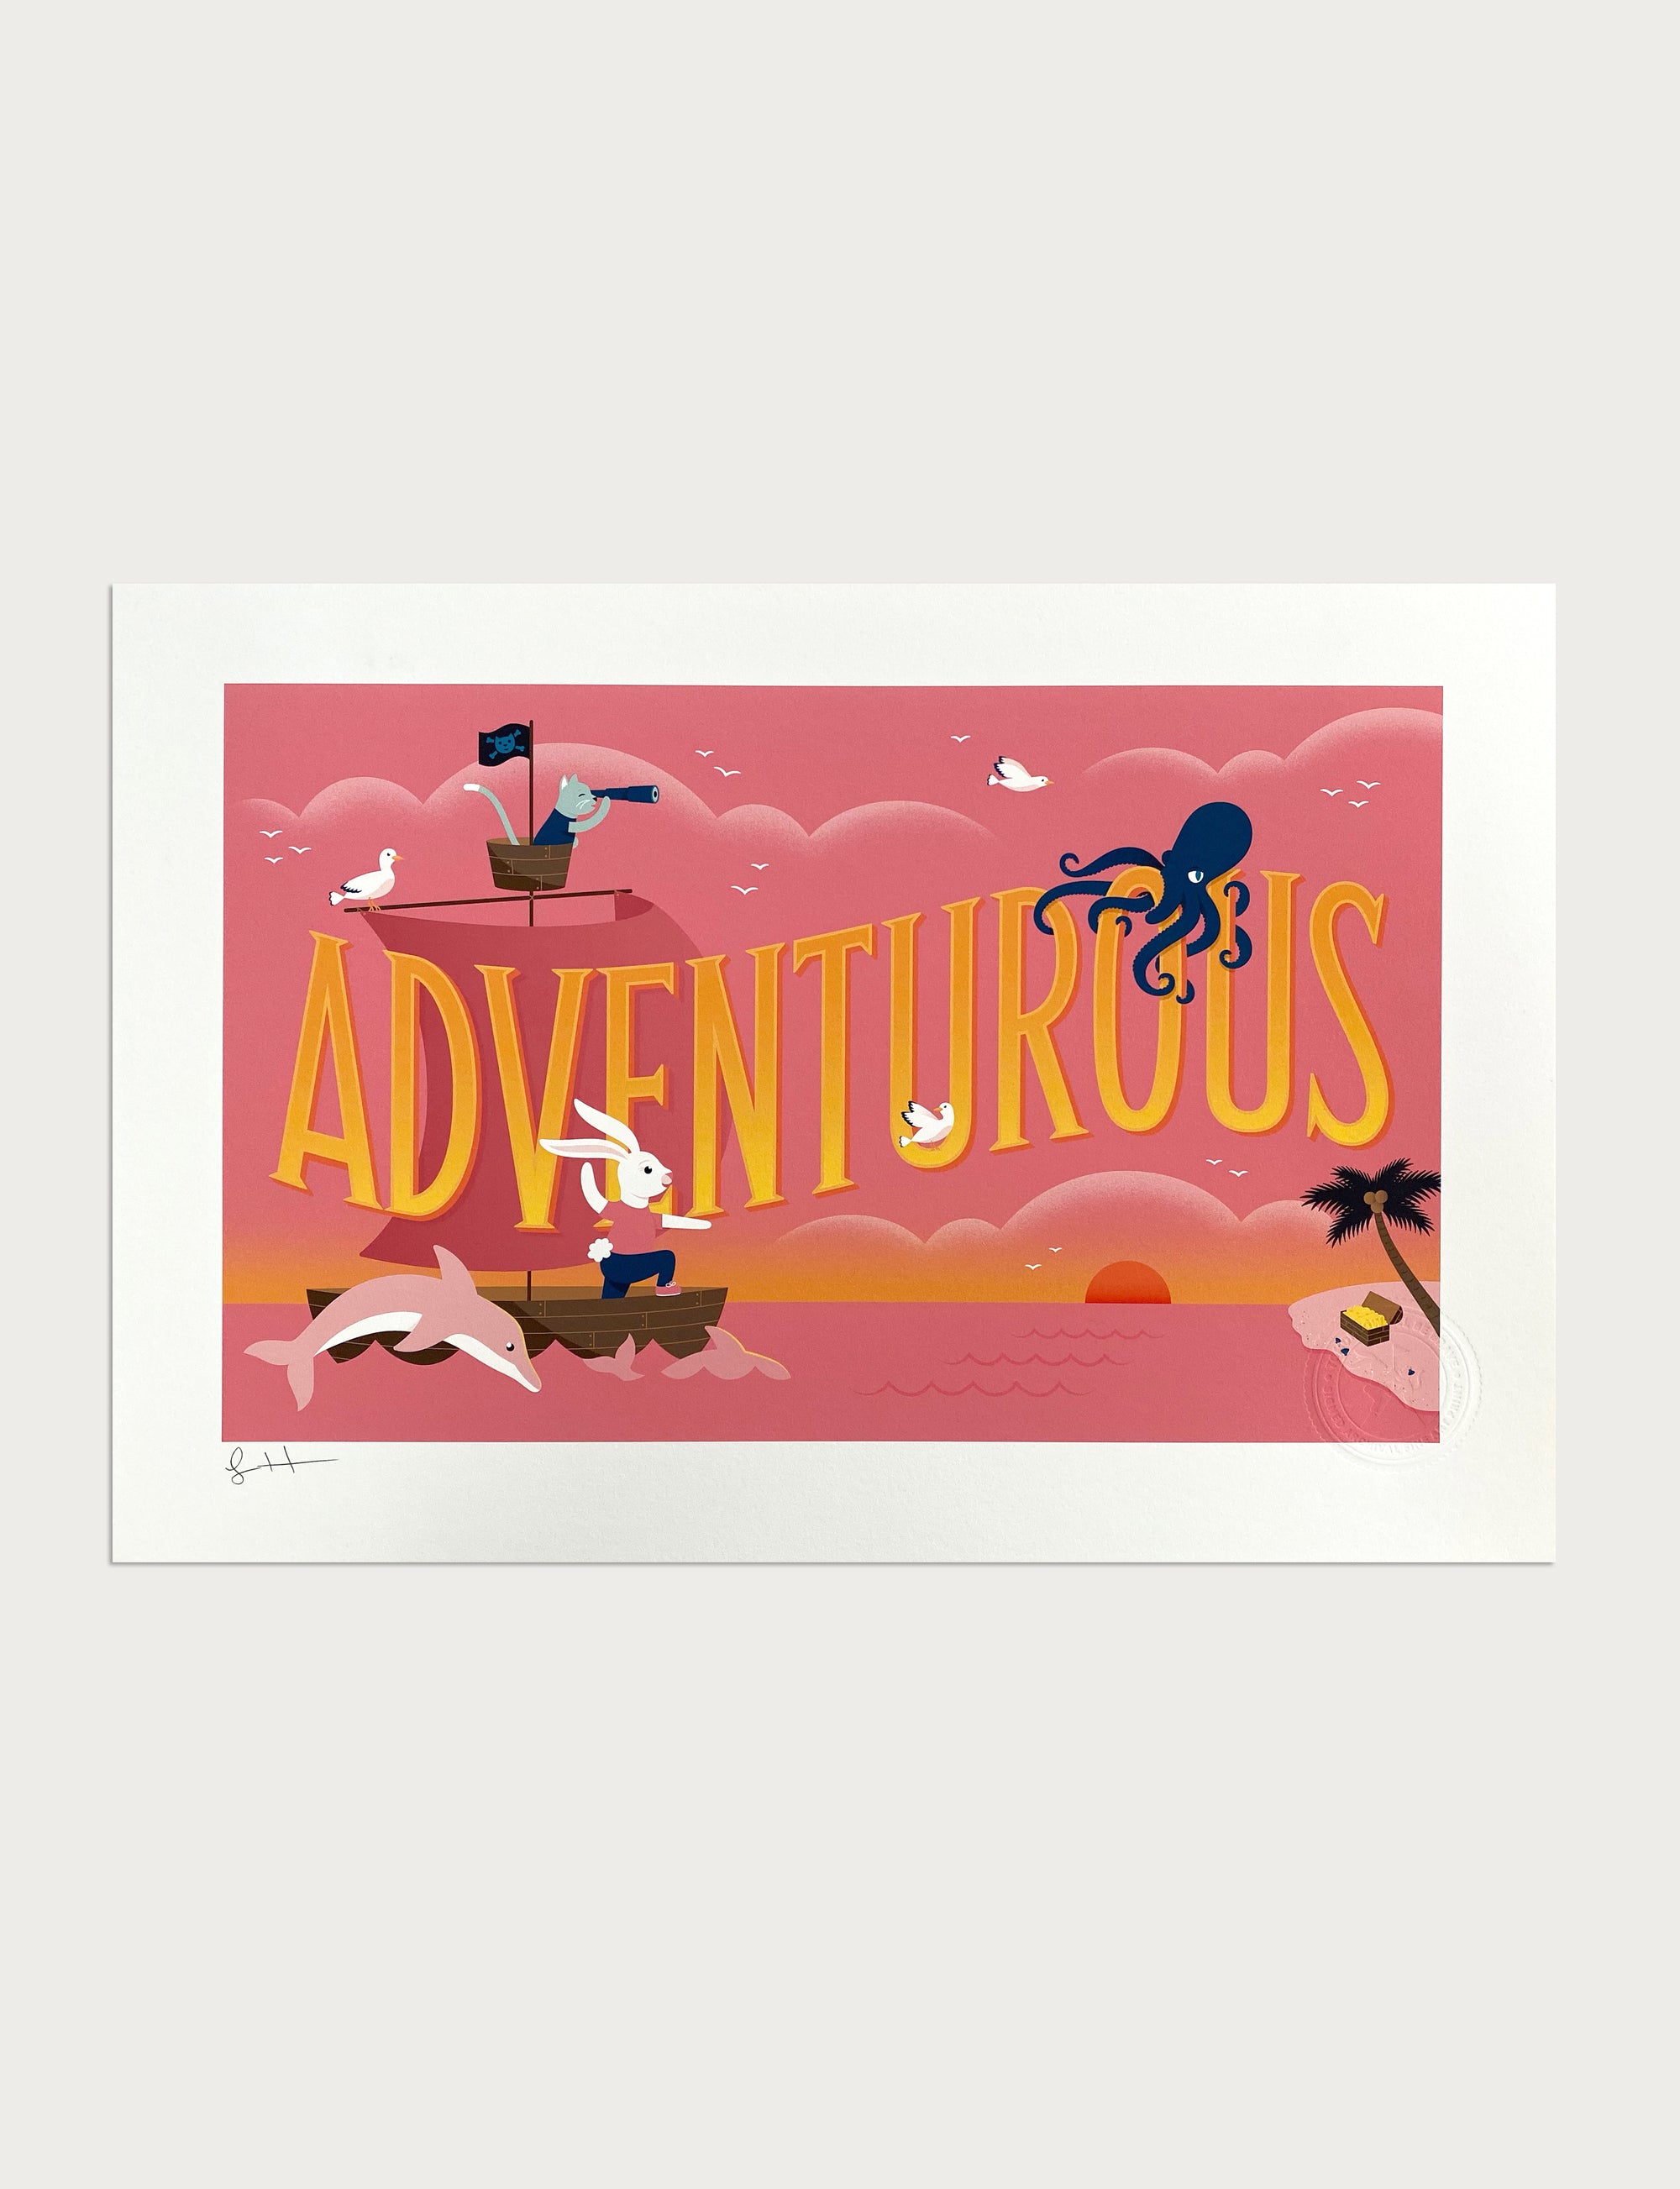 Giclée print of illustrated word "Adventurous" set inside a scene of main characters sailing towards an island.